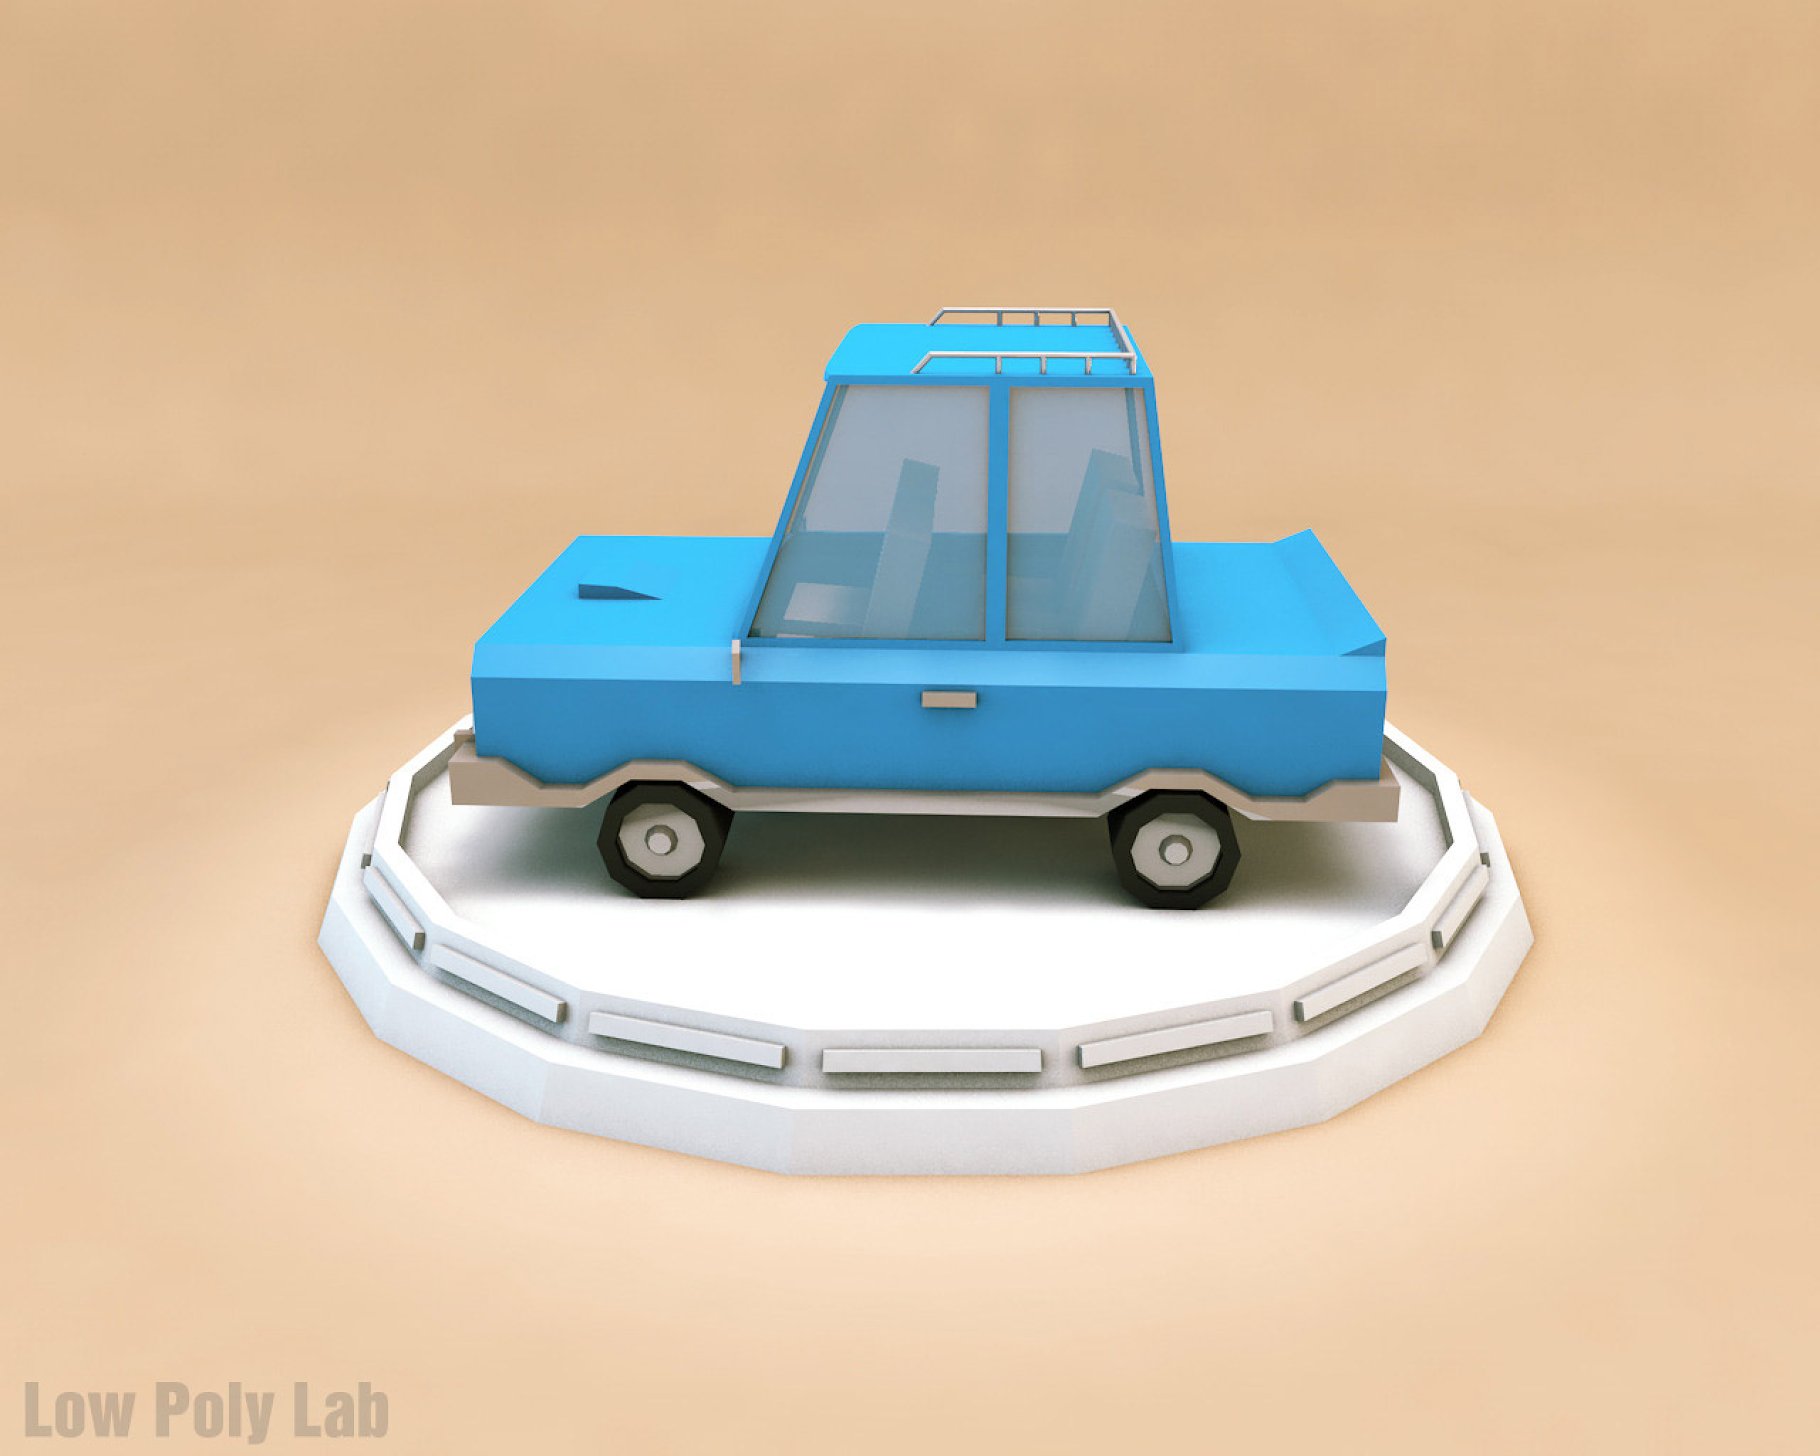 Low poly car in blue on the left side on a beige background.